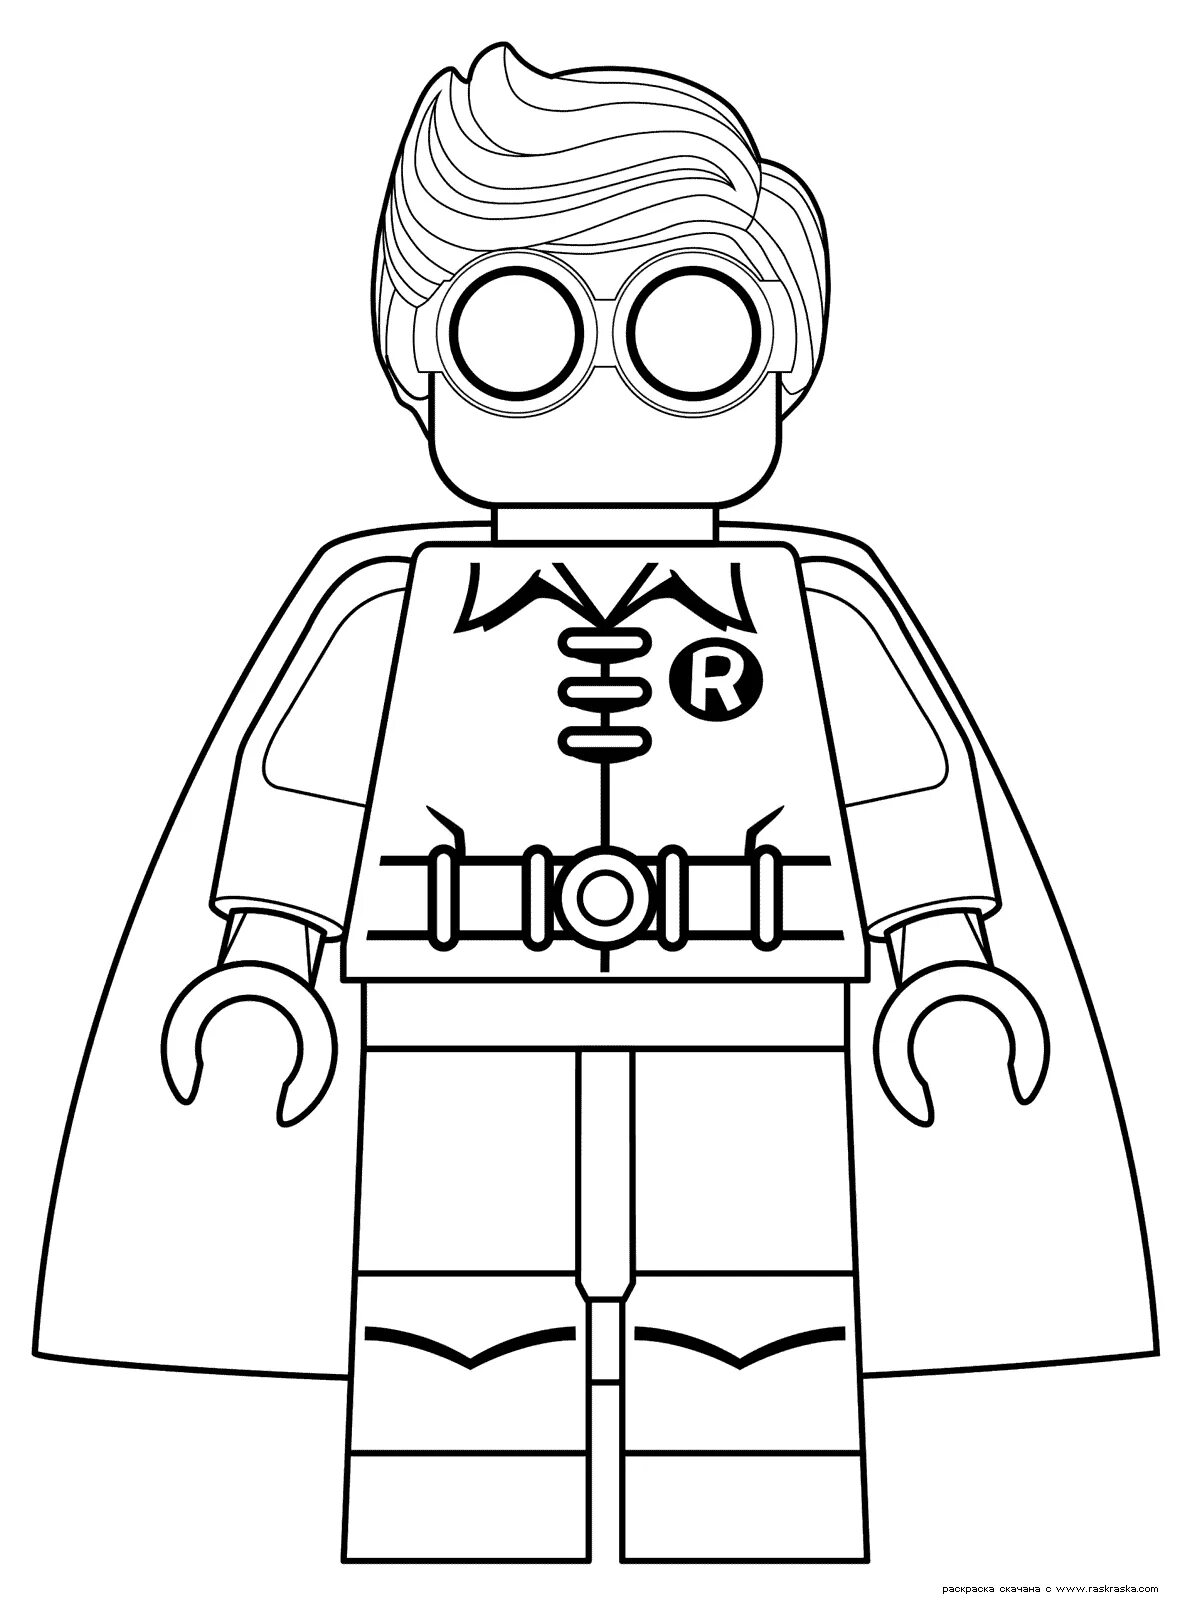 Marvelous heroes lego coloring book